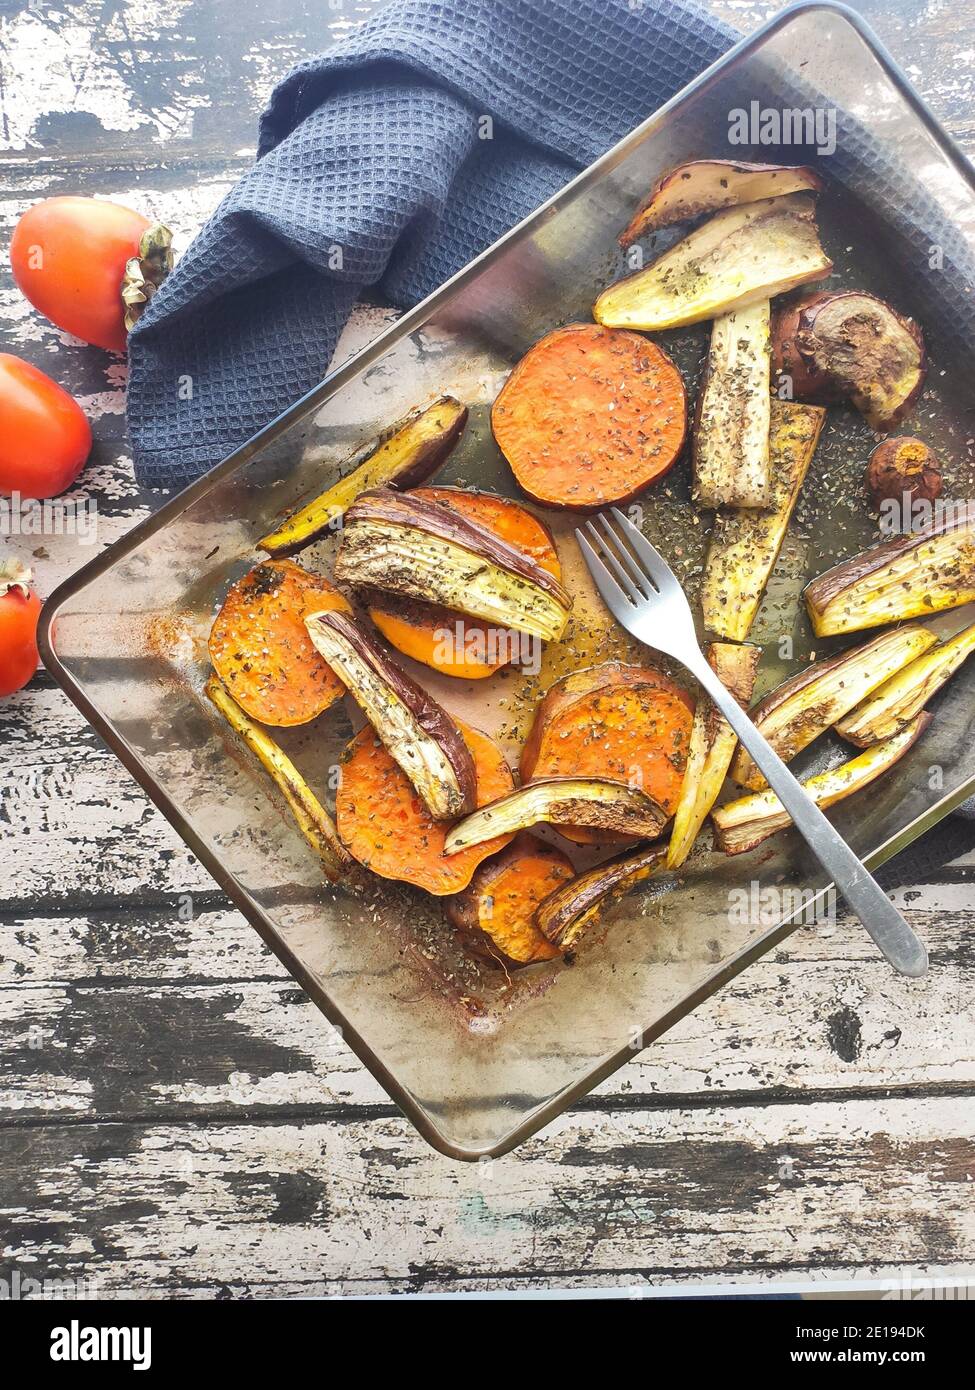 Baked vegetable in a wood table background Stock Photo